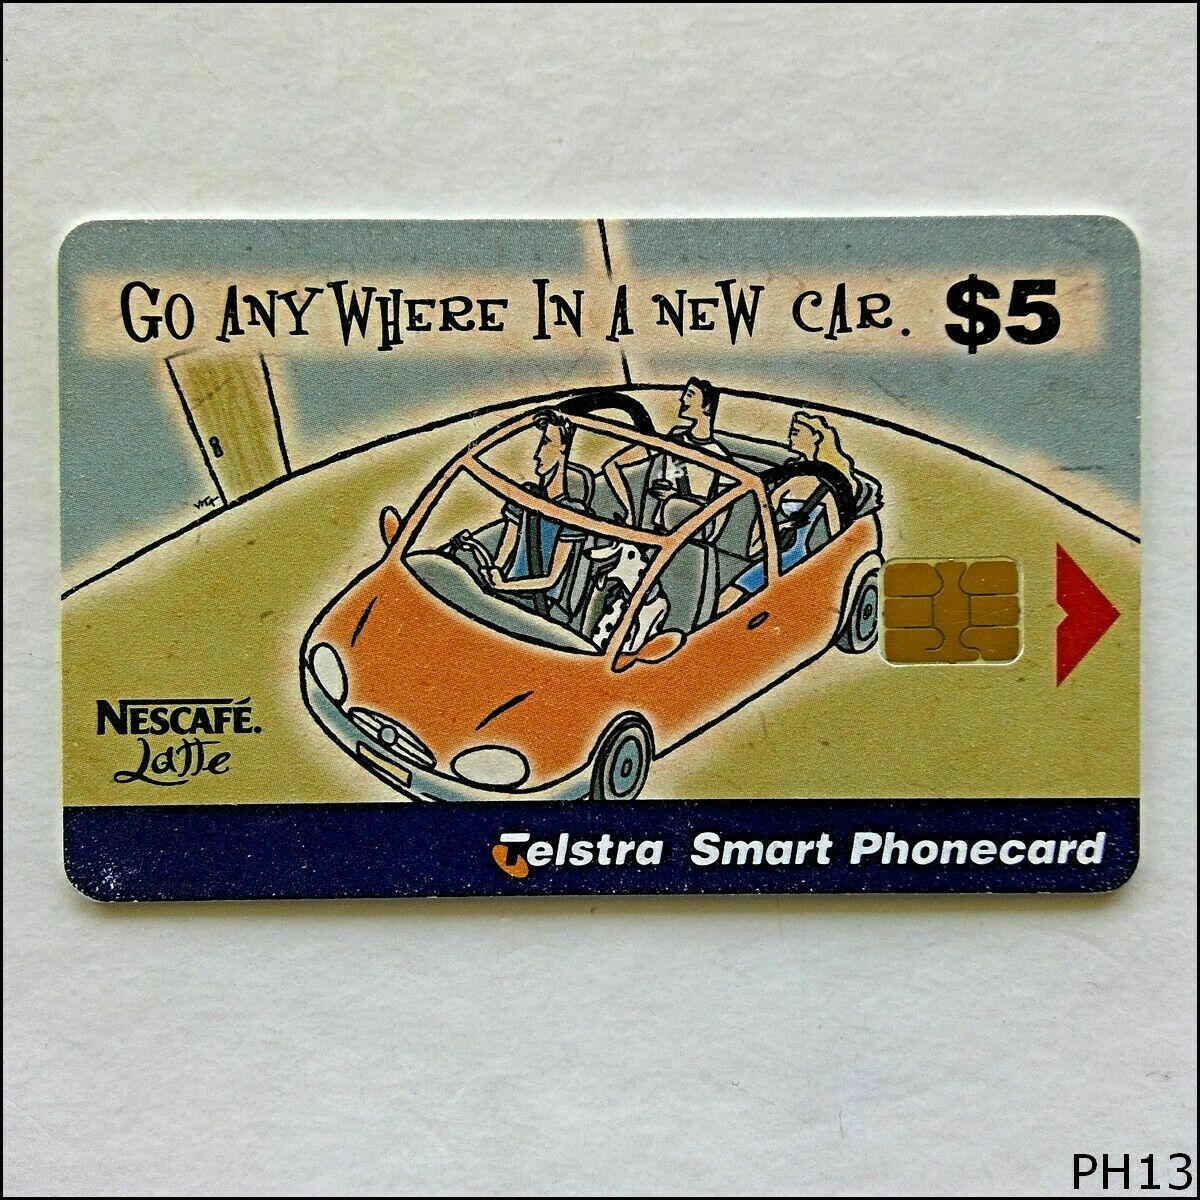 Telstra Nescafe Hanging With Billy 99005010n $5 Smart Phonecard (ph13)